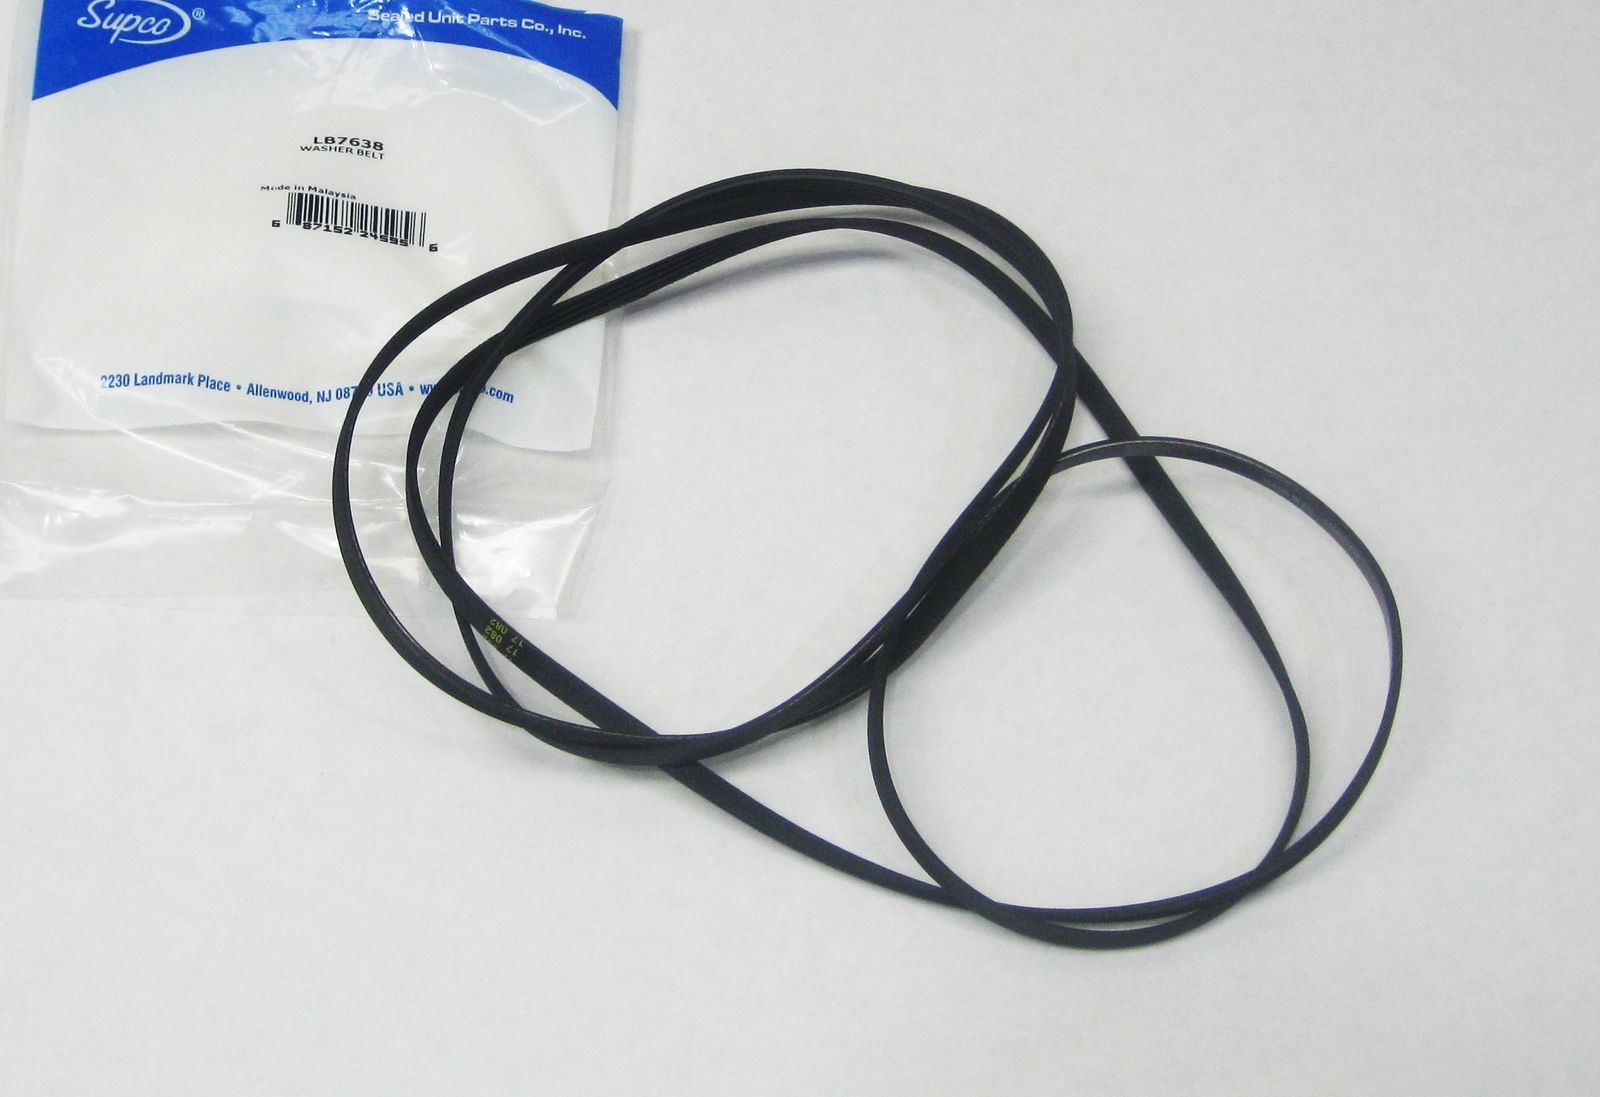 Supco LB7638 Replacement Dryer Belt 5308027638 for Frigidaire Gibson Frigidaire Washer Dryer Combo Belt Replacement